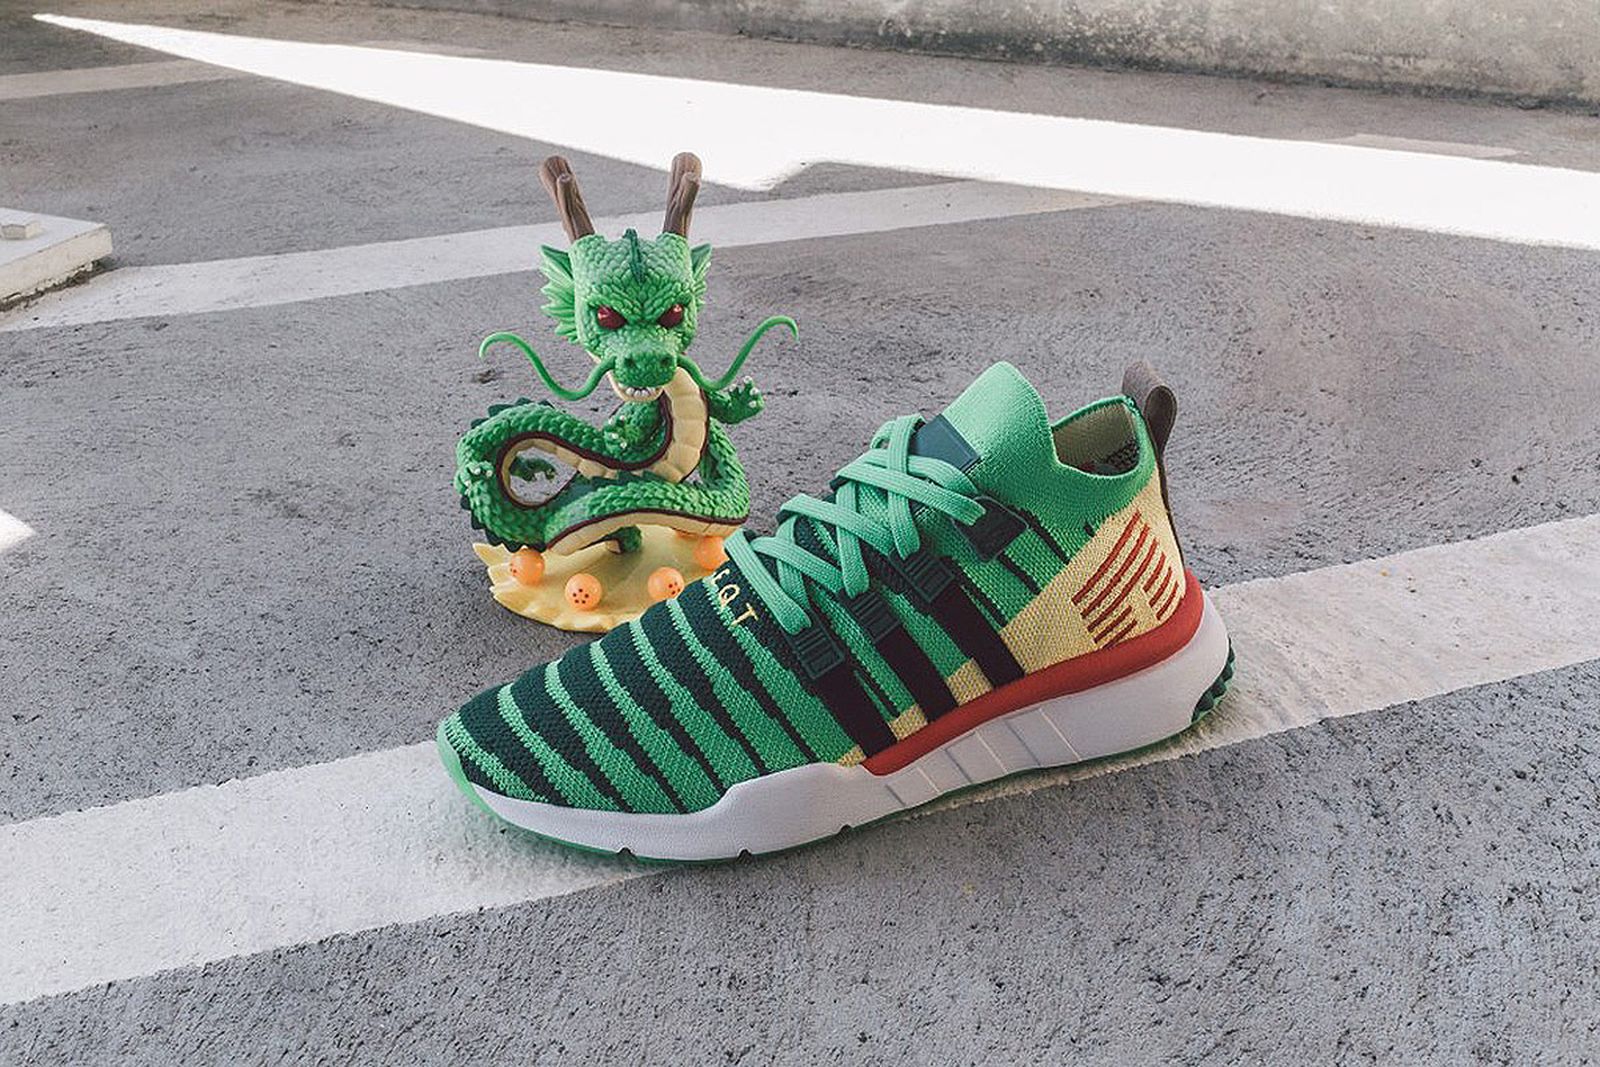 Dragon Ball Z' x adidas: A Complete at the Collection